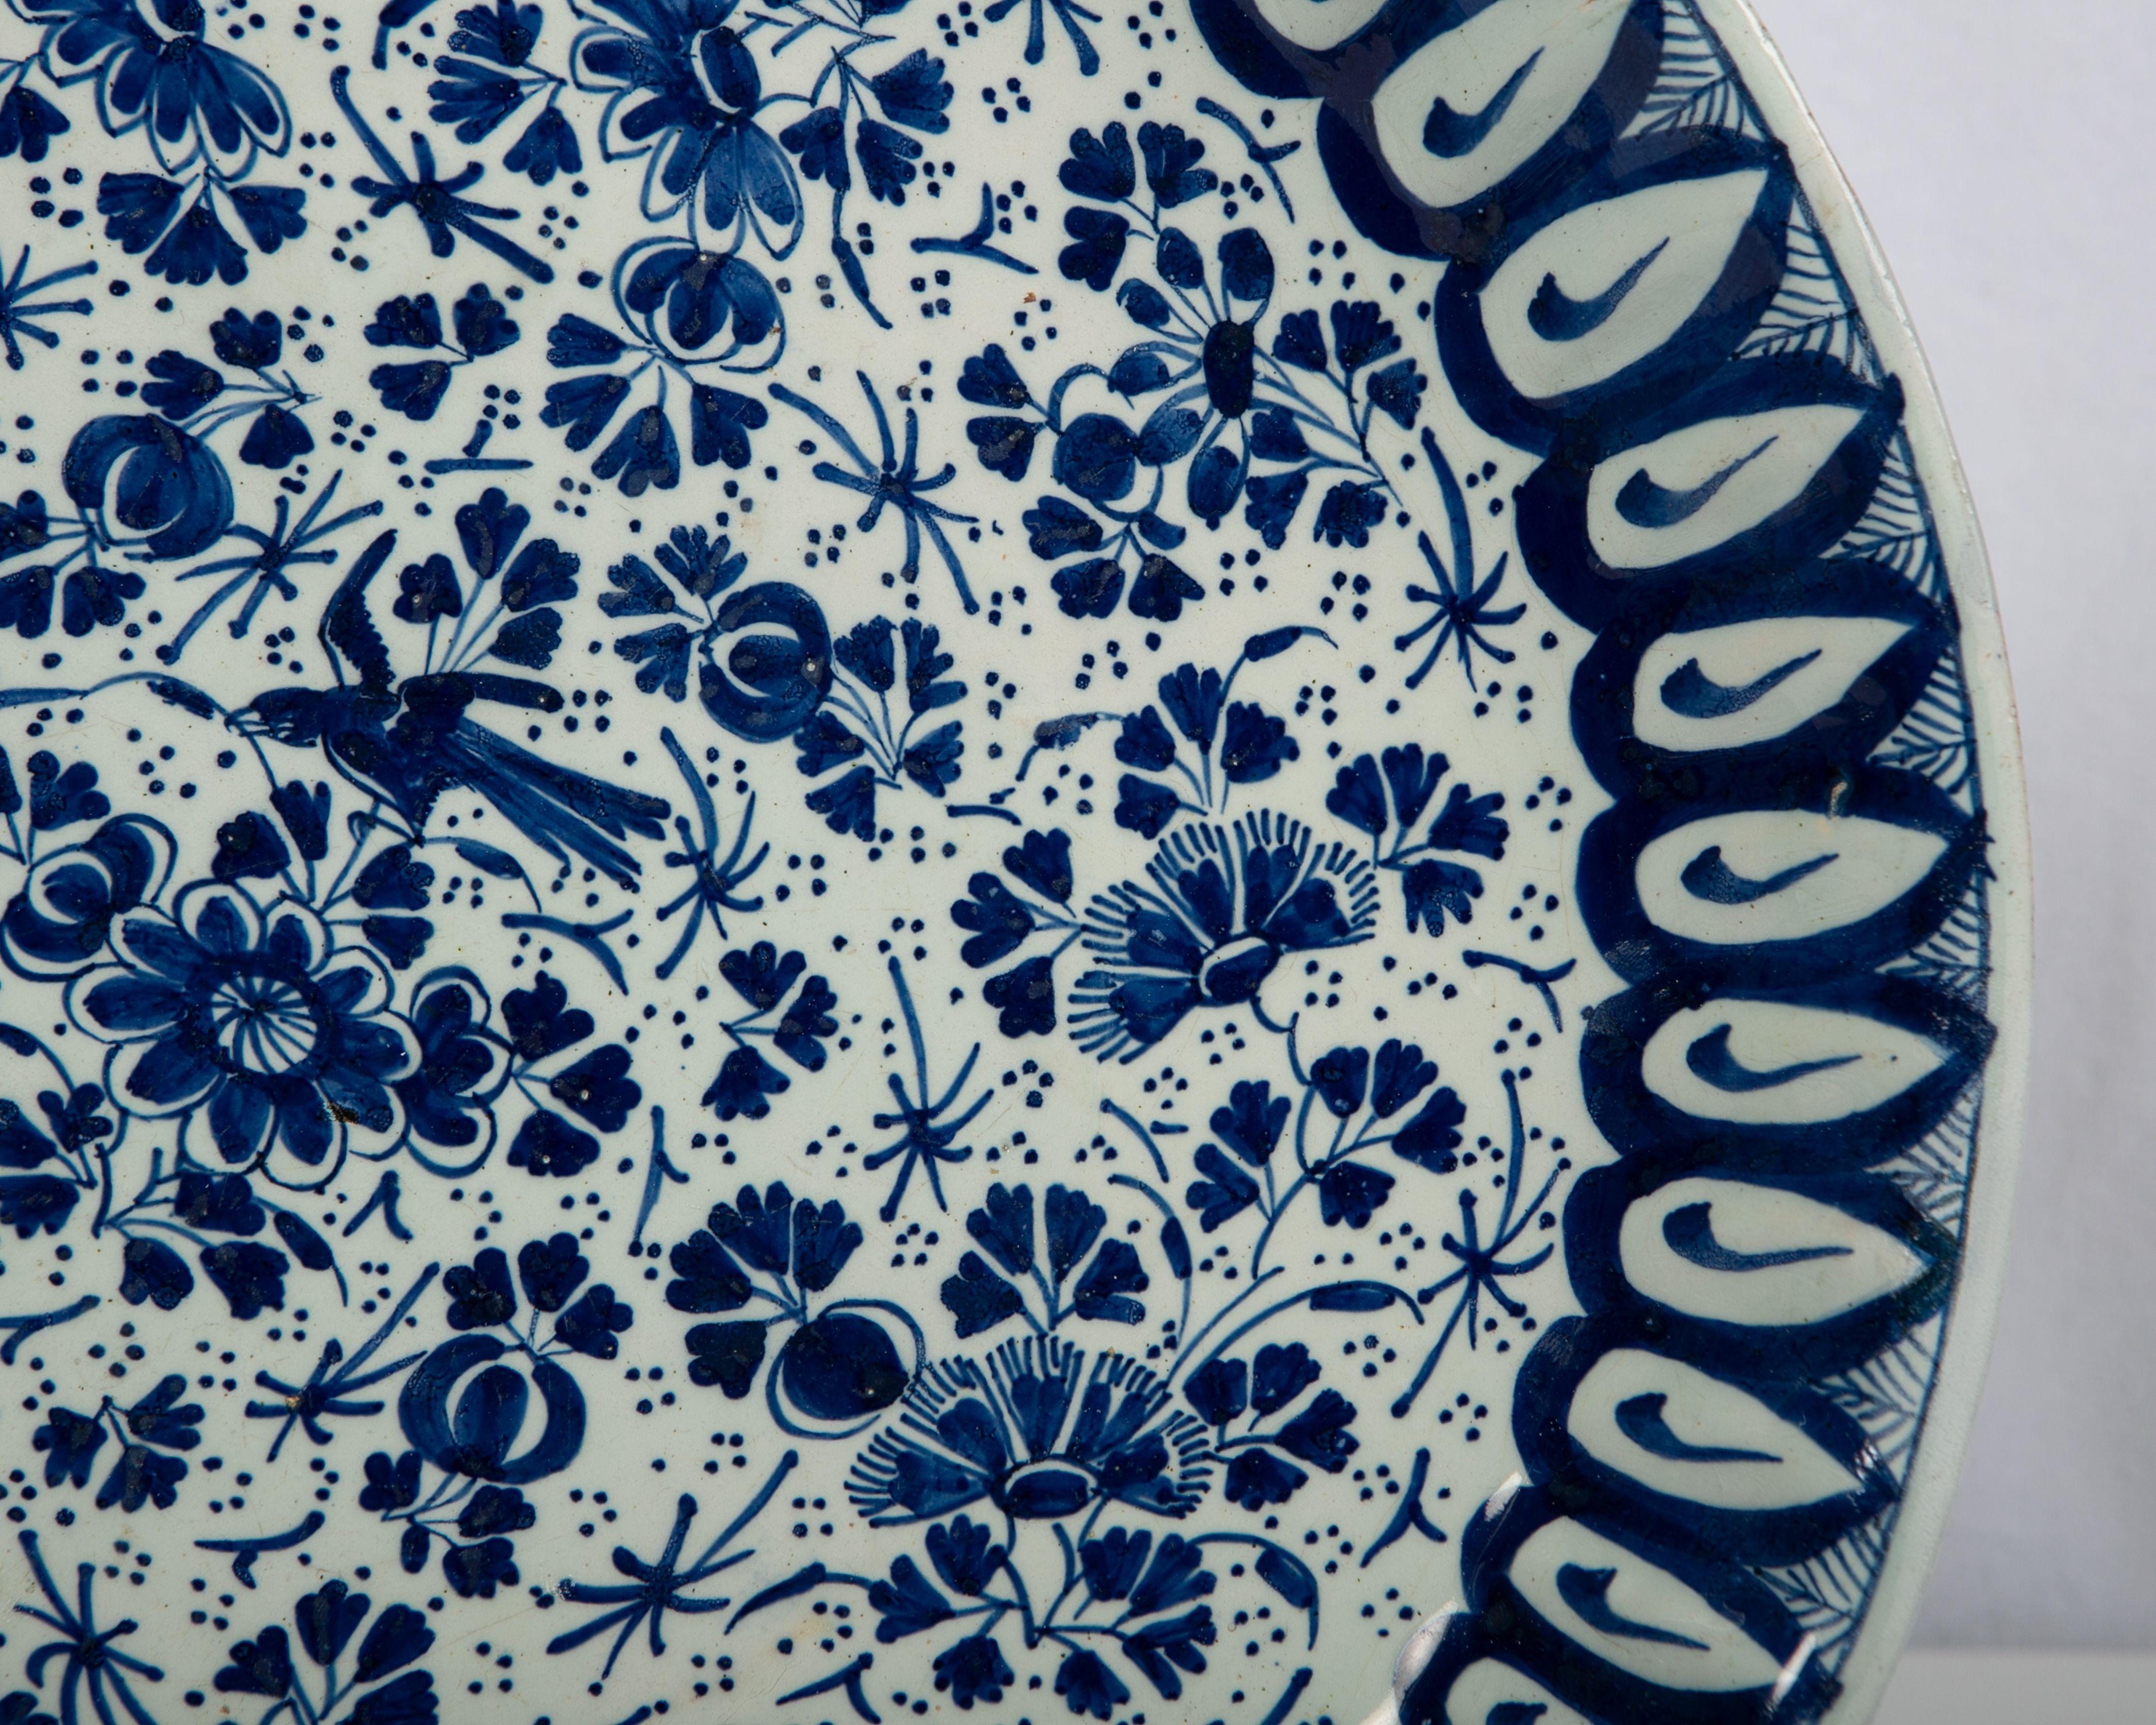 Hand-Painted Large Antique Blue and White Delft Charger Made, Late 18th Century, circa 1770